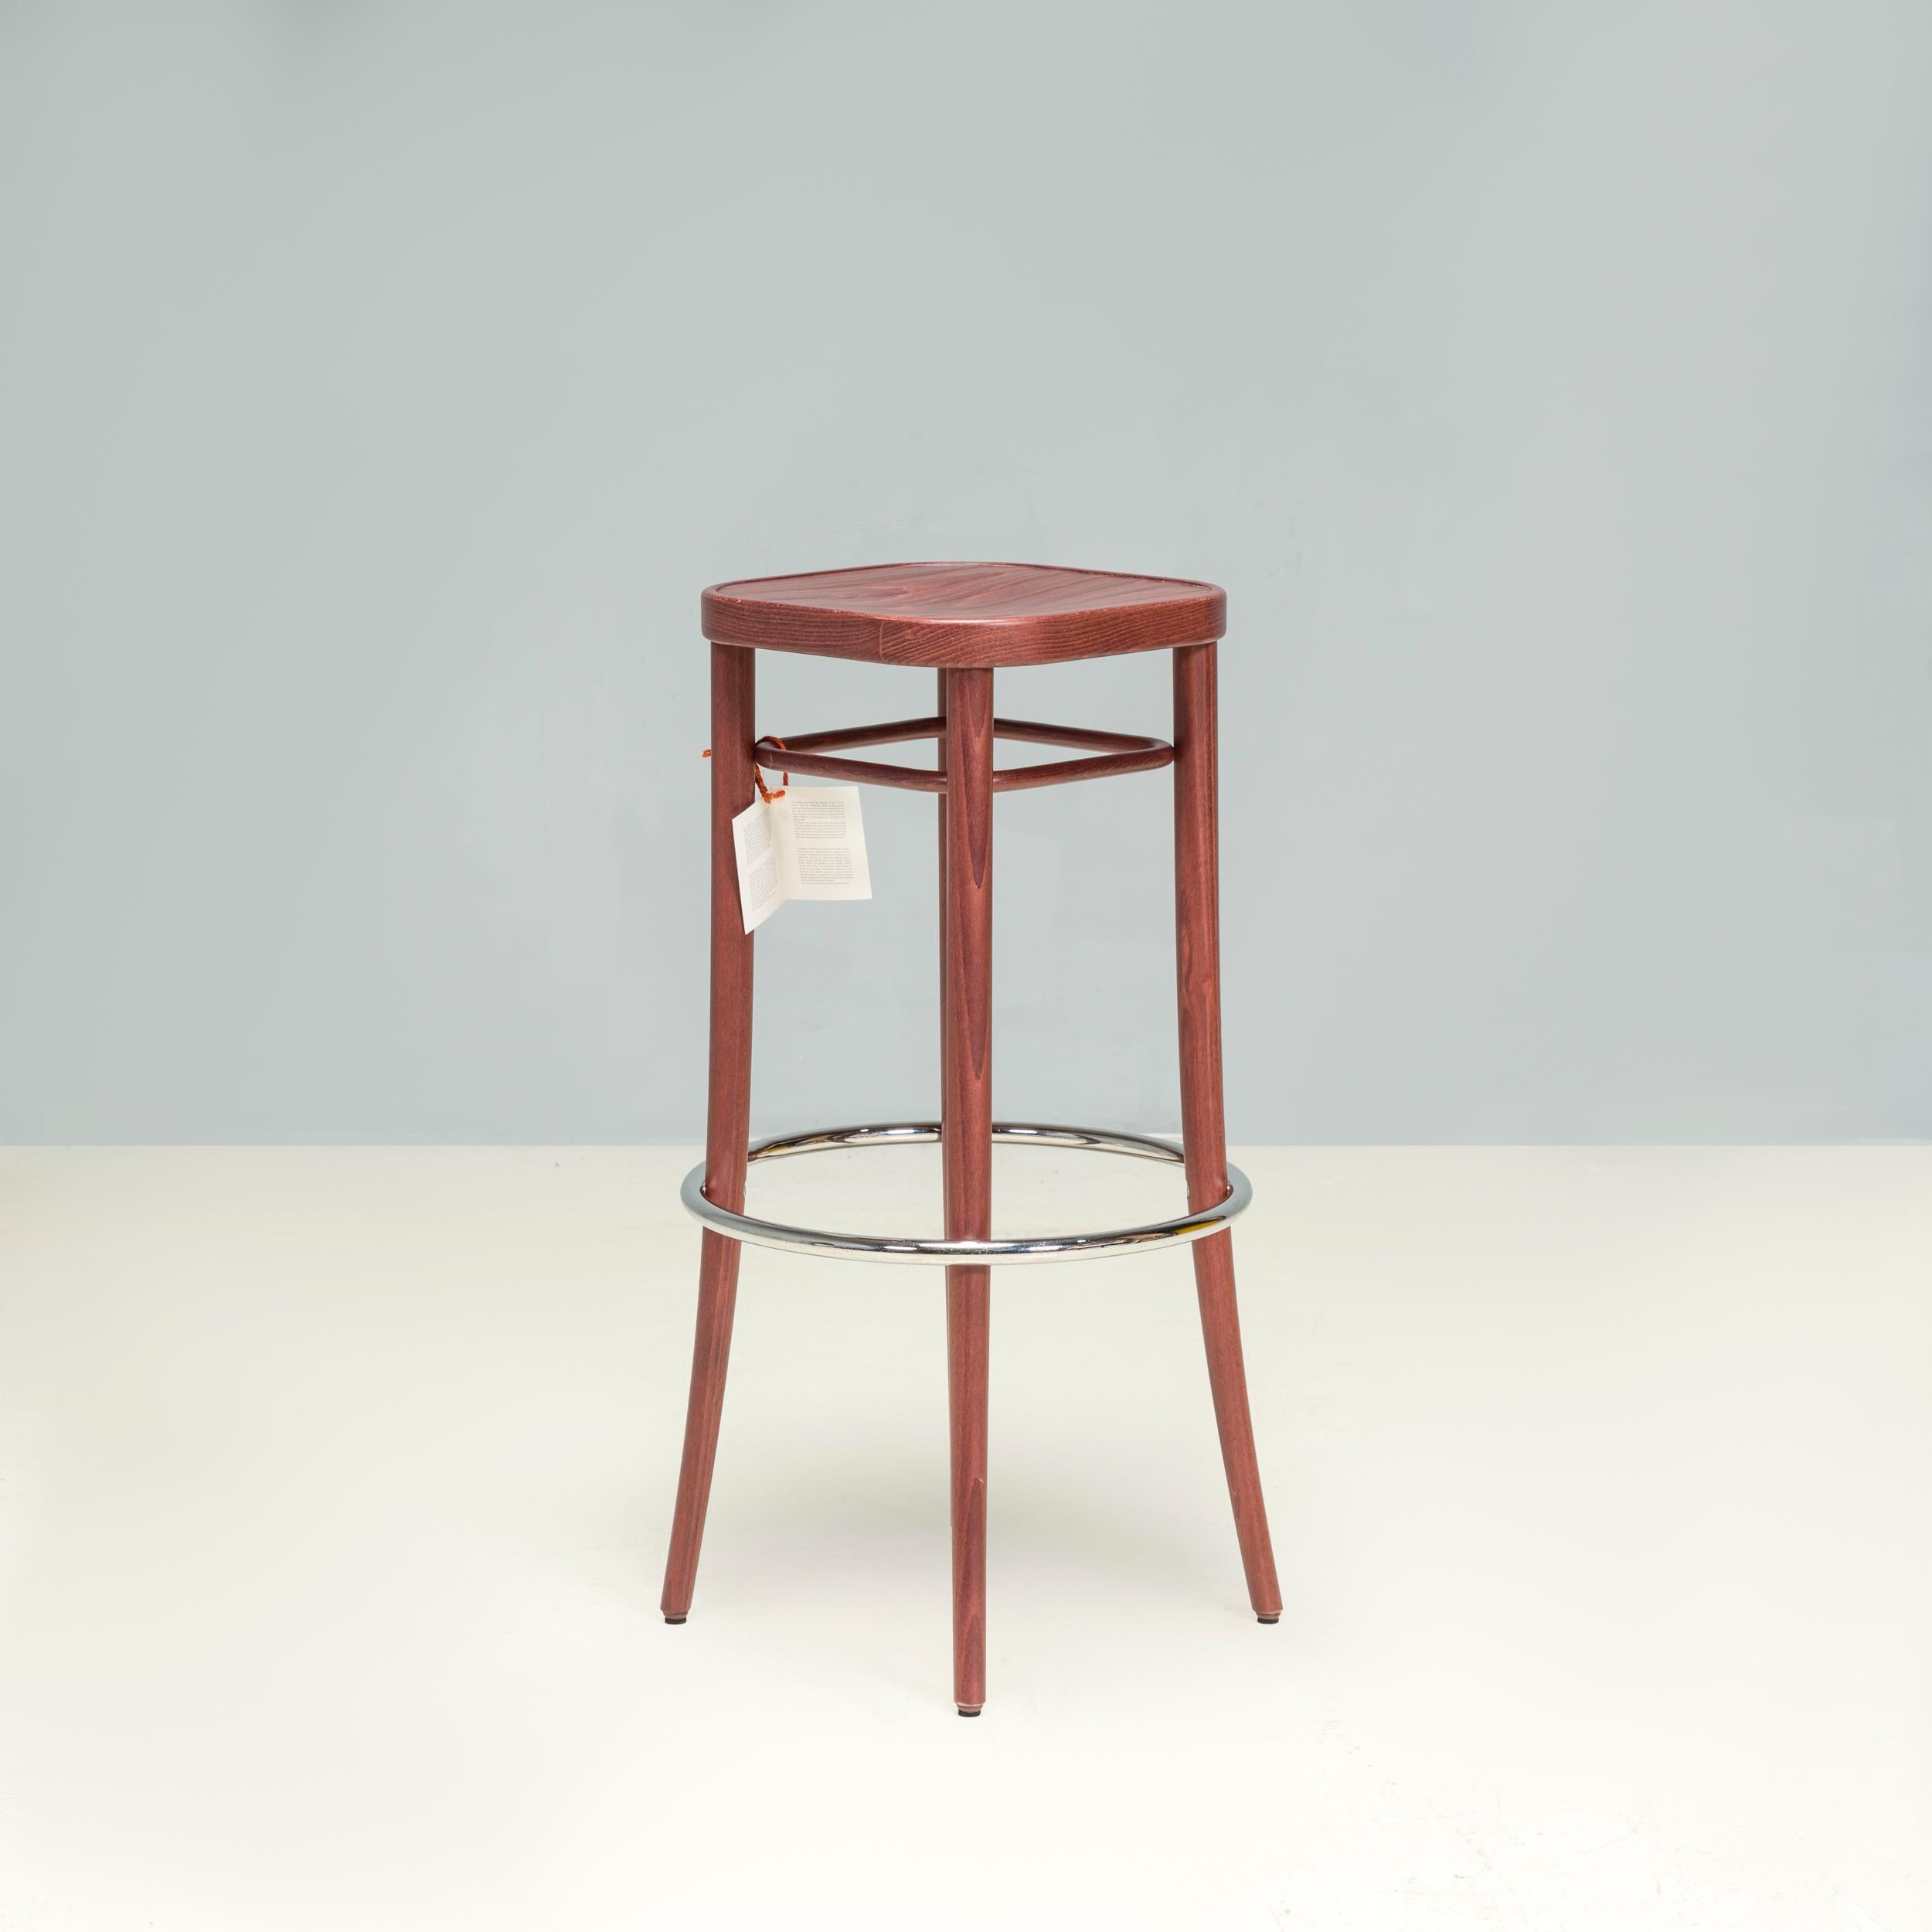 Thonet Vienna Walnut 144 Barhocker Stools, Set of 3 In Excellent Condition For Sale In London, GB